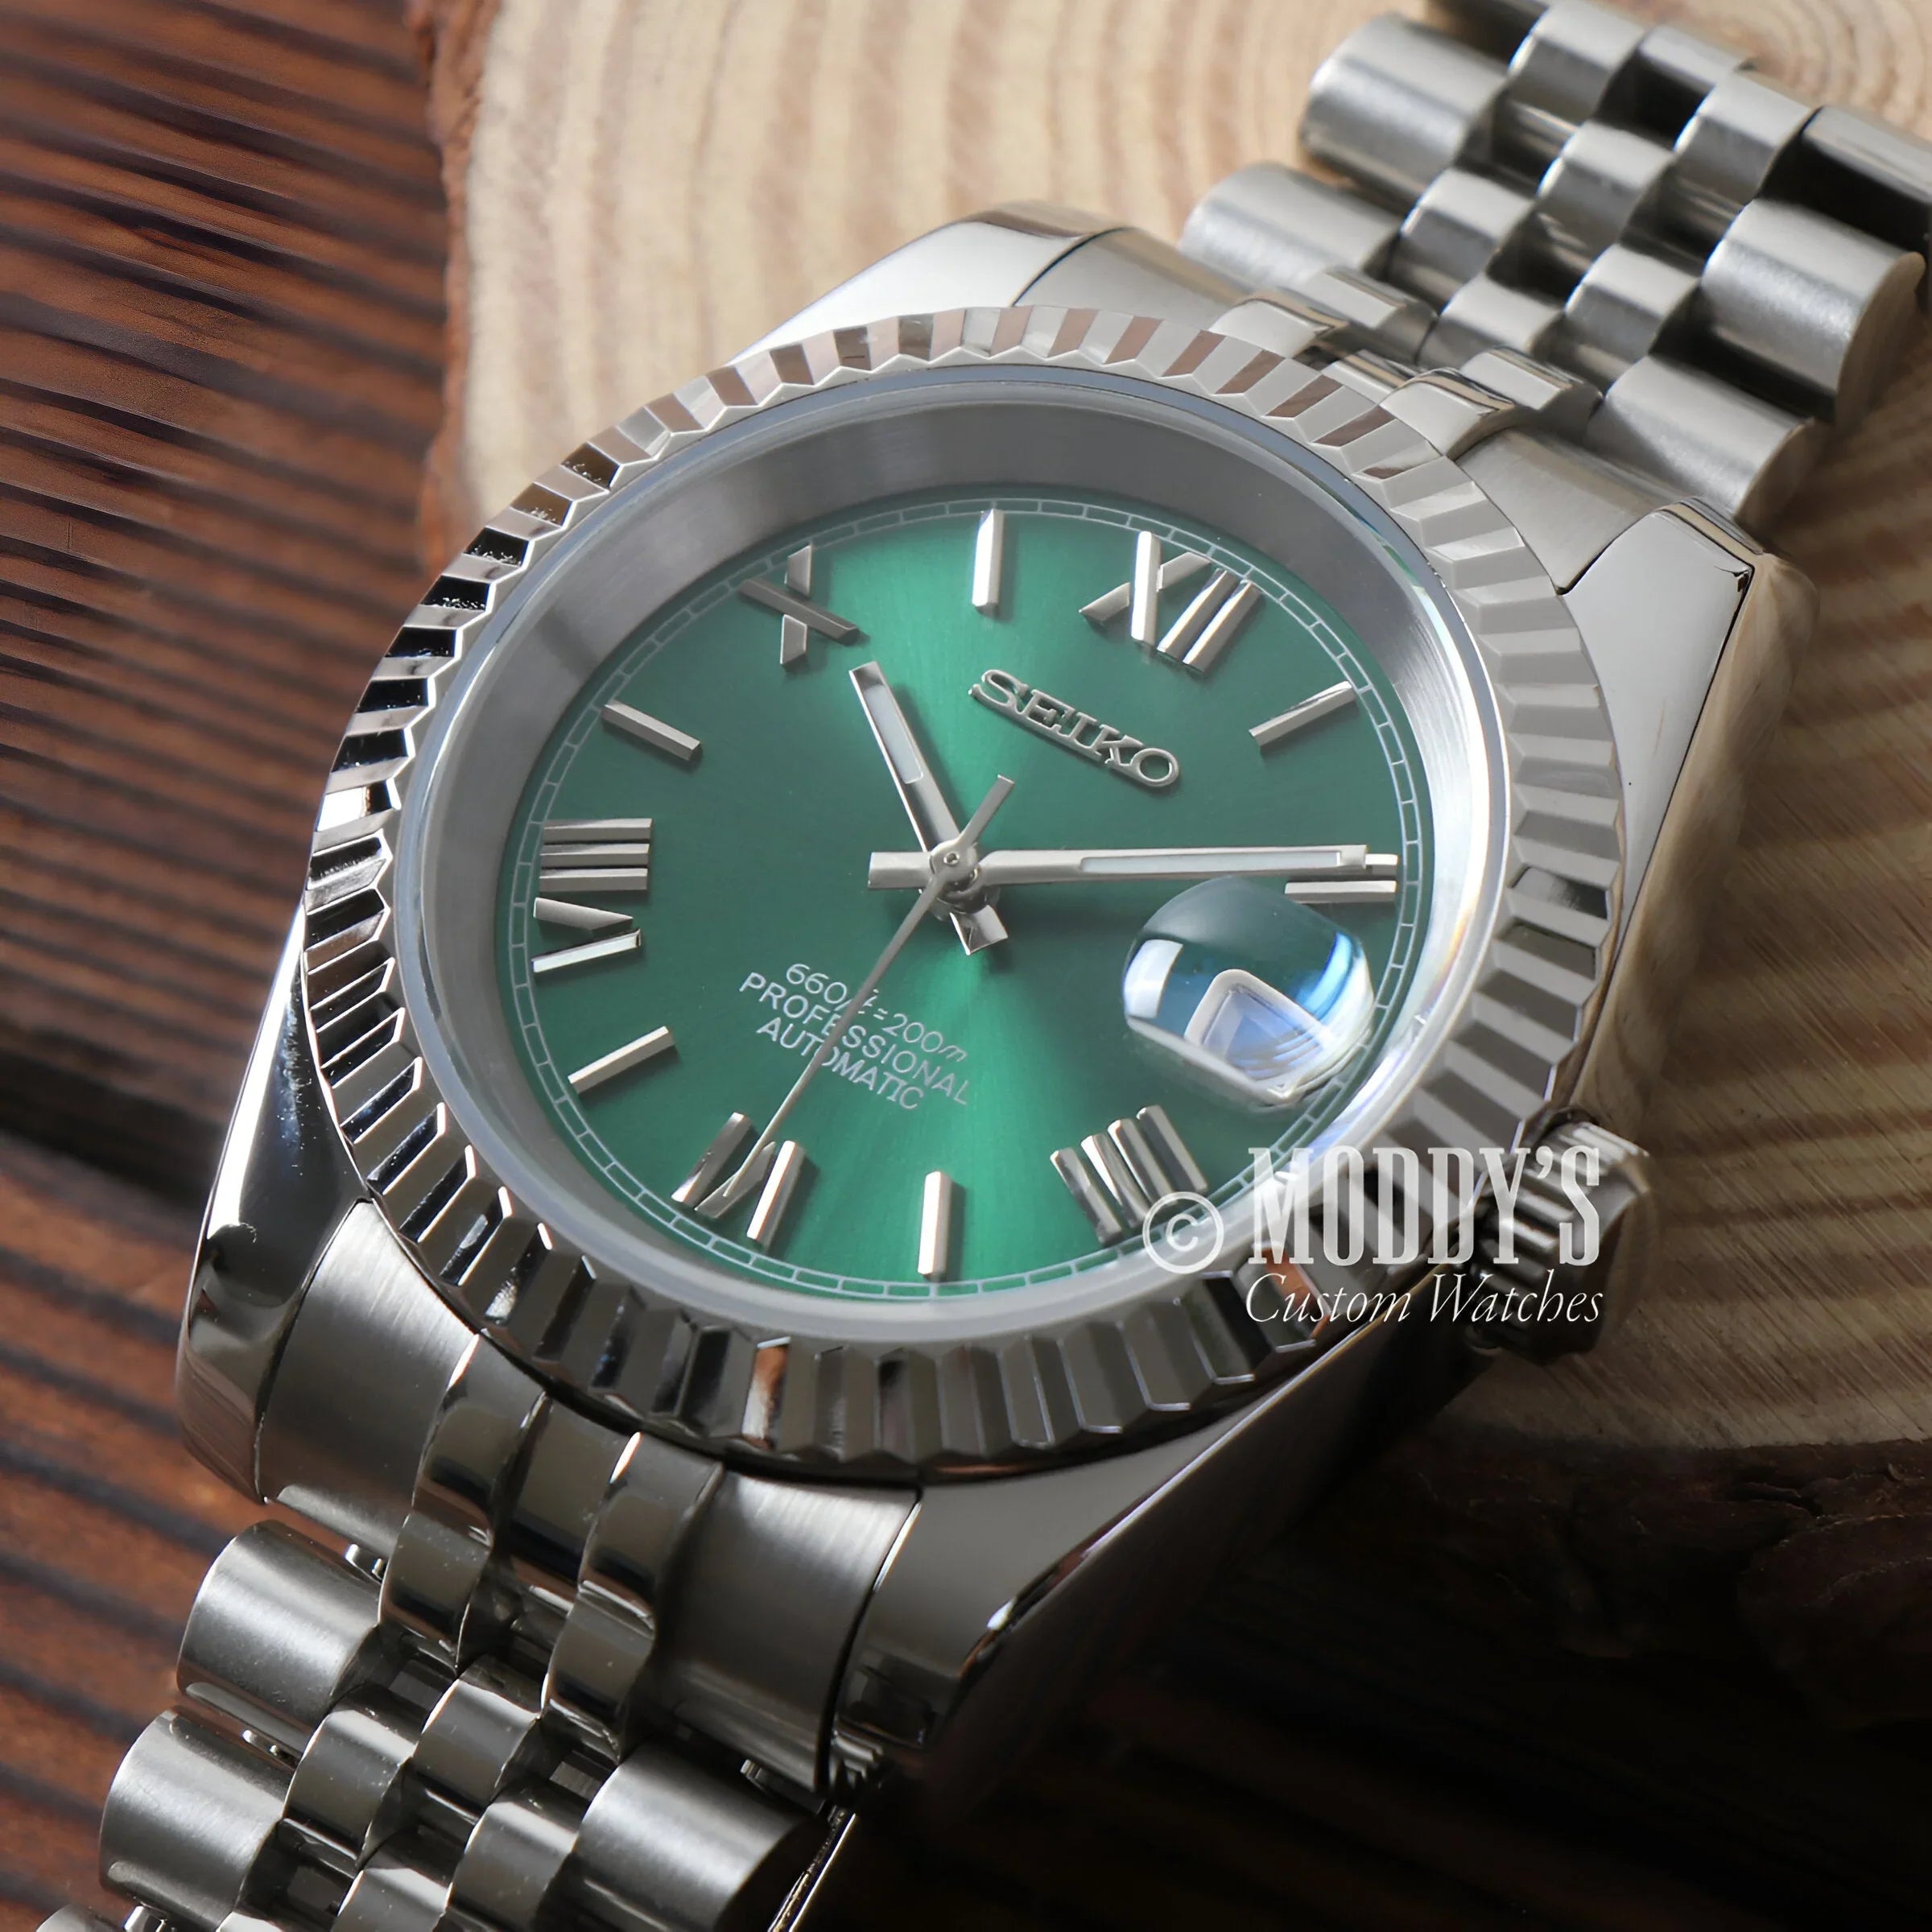 Close-up Of Seikojust Green Roman Watch With Green Dial On Wooden Surface, Automatic Nh35